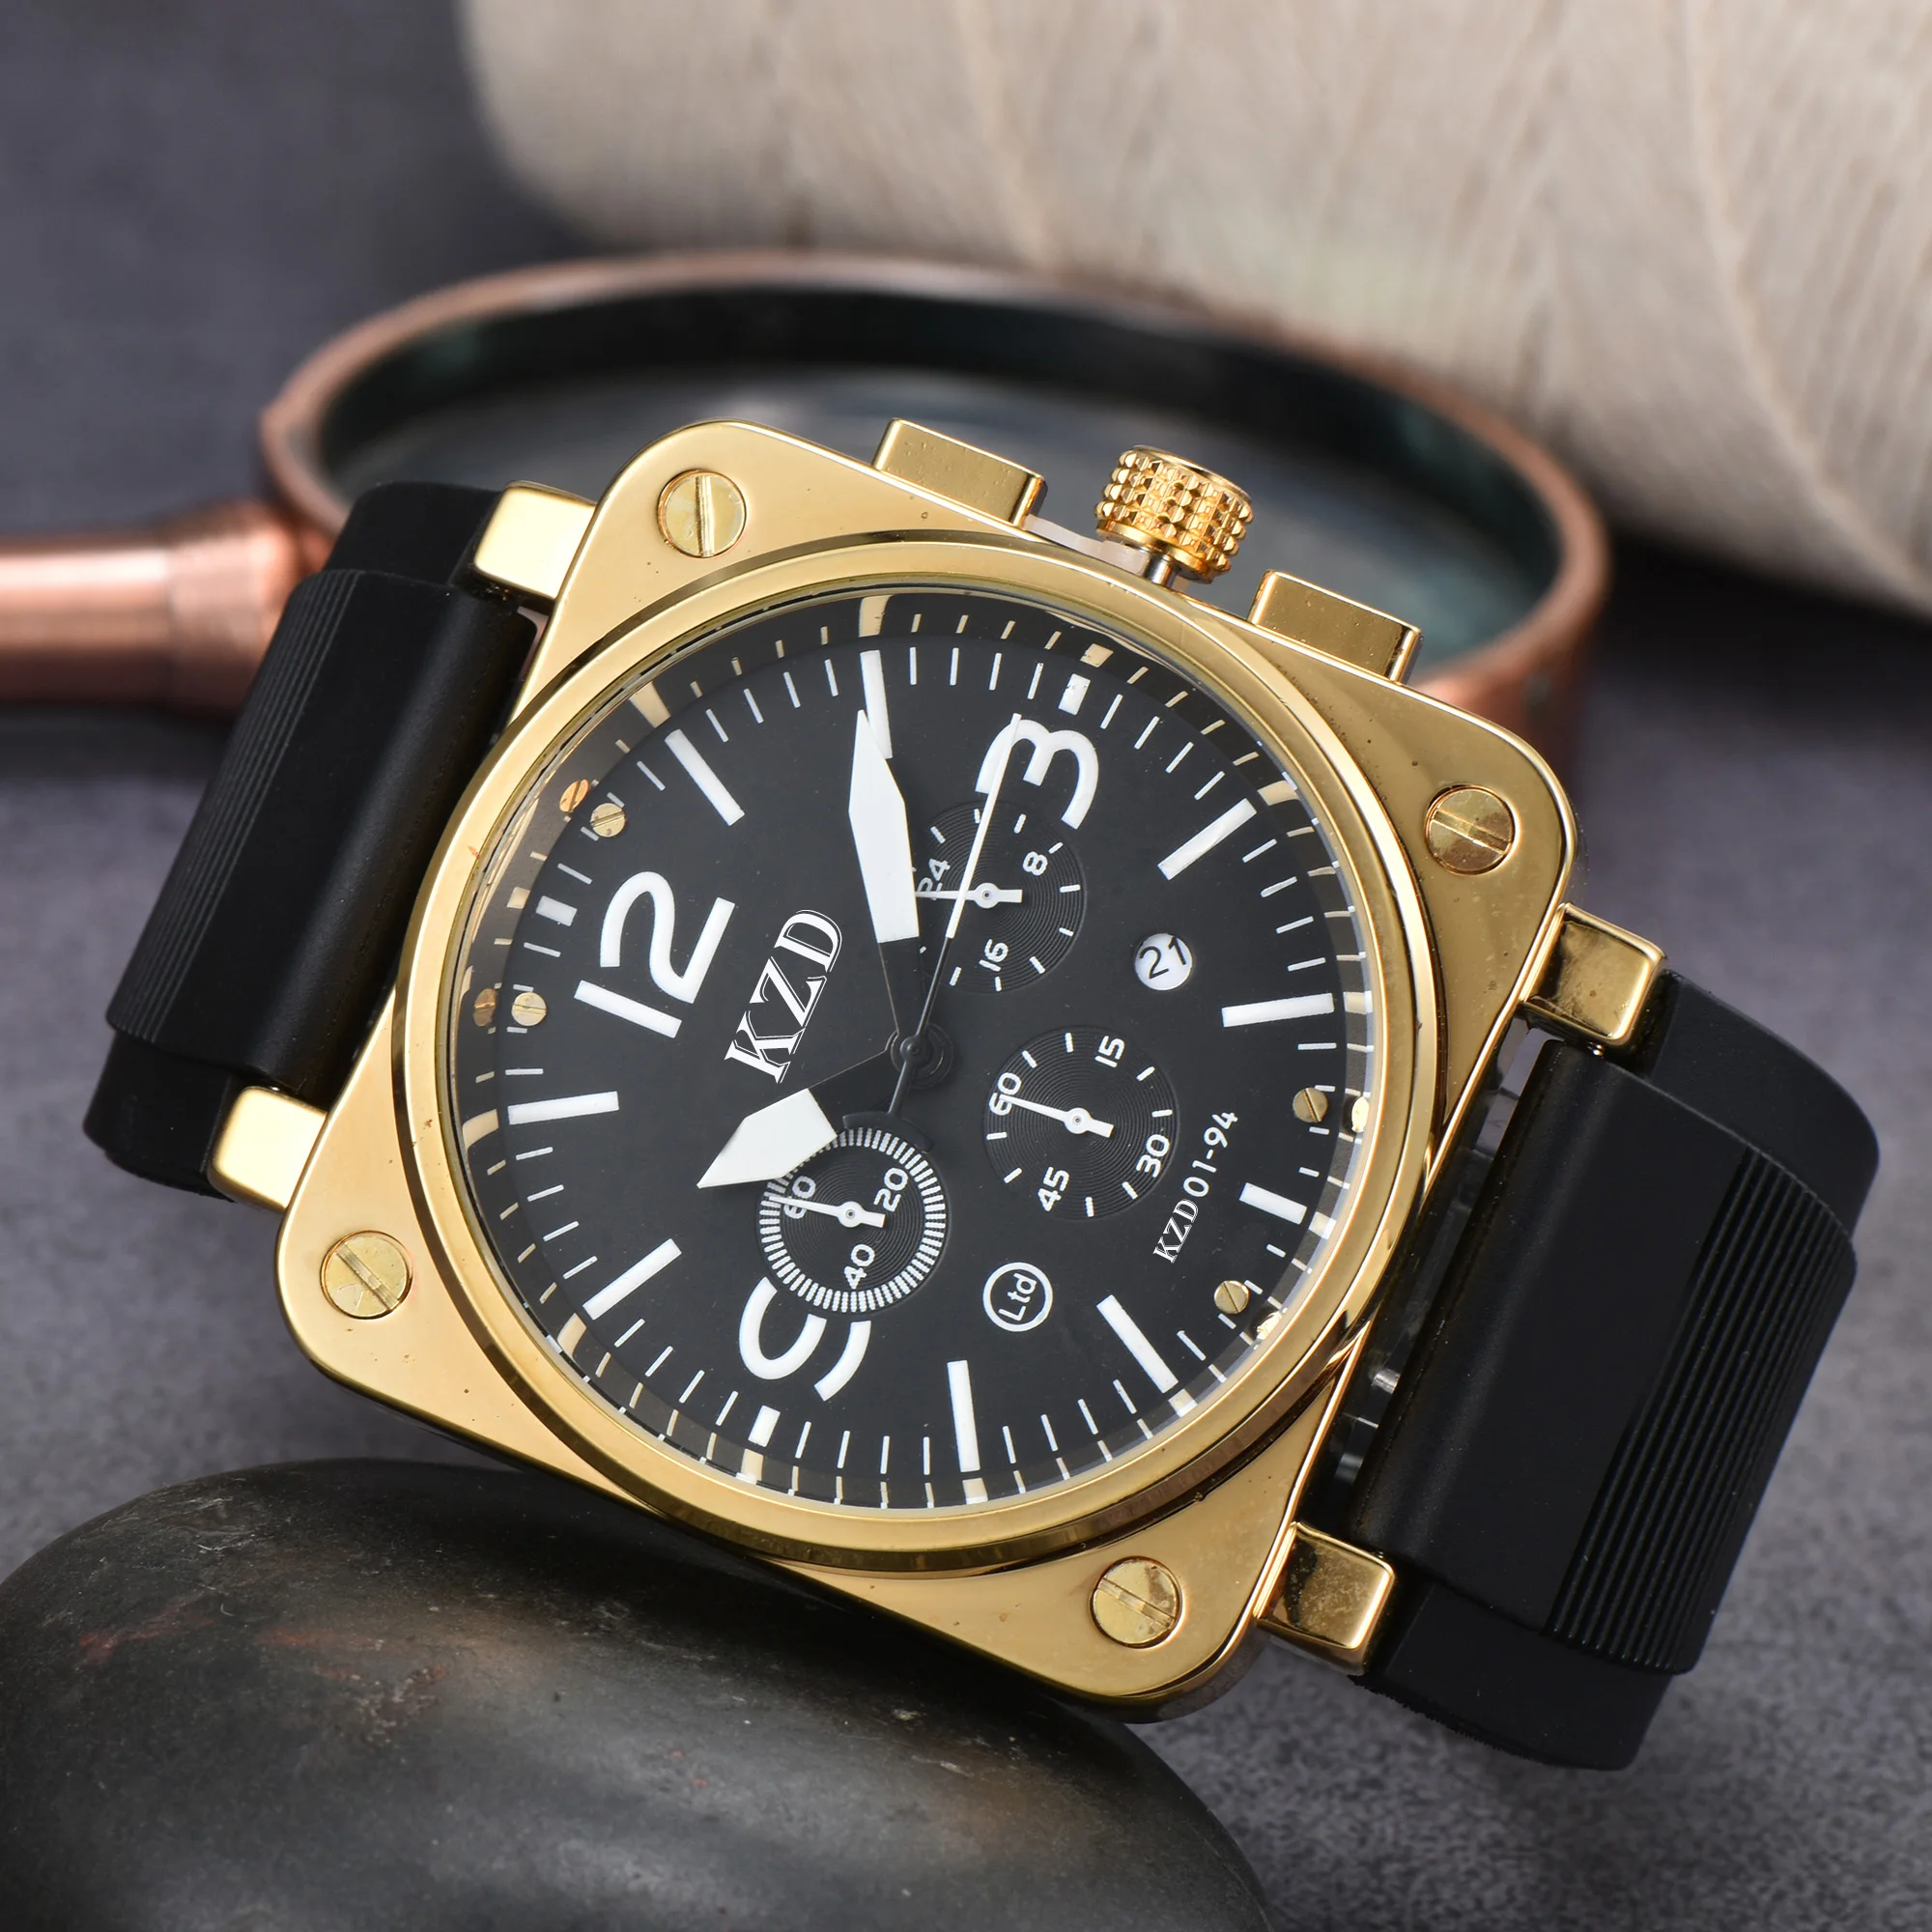 

TOP1 Fashion Luxury Men Classic Sports Quartz Watch Worldwide Sales Of Silica Gel Watchband In a Variety Of Colors